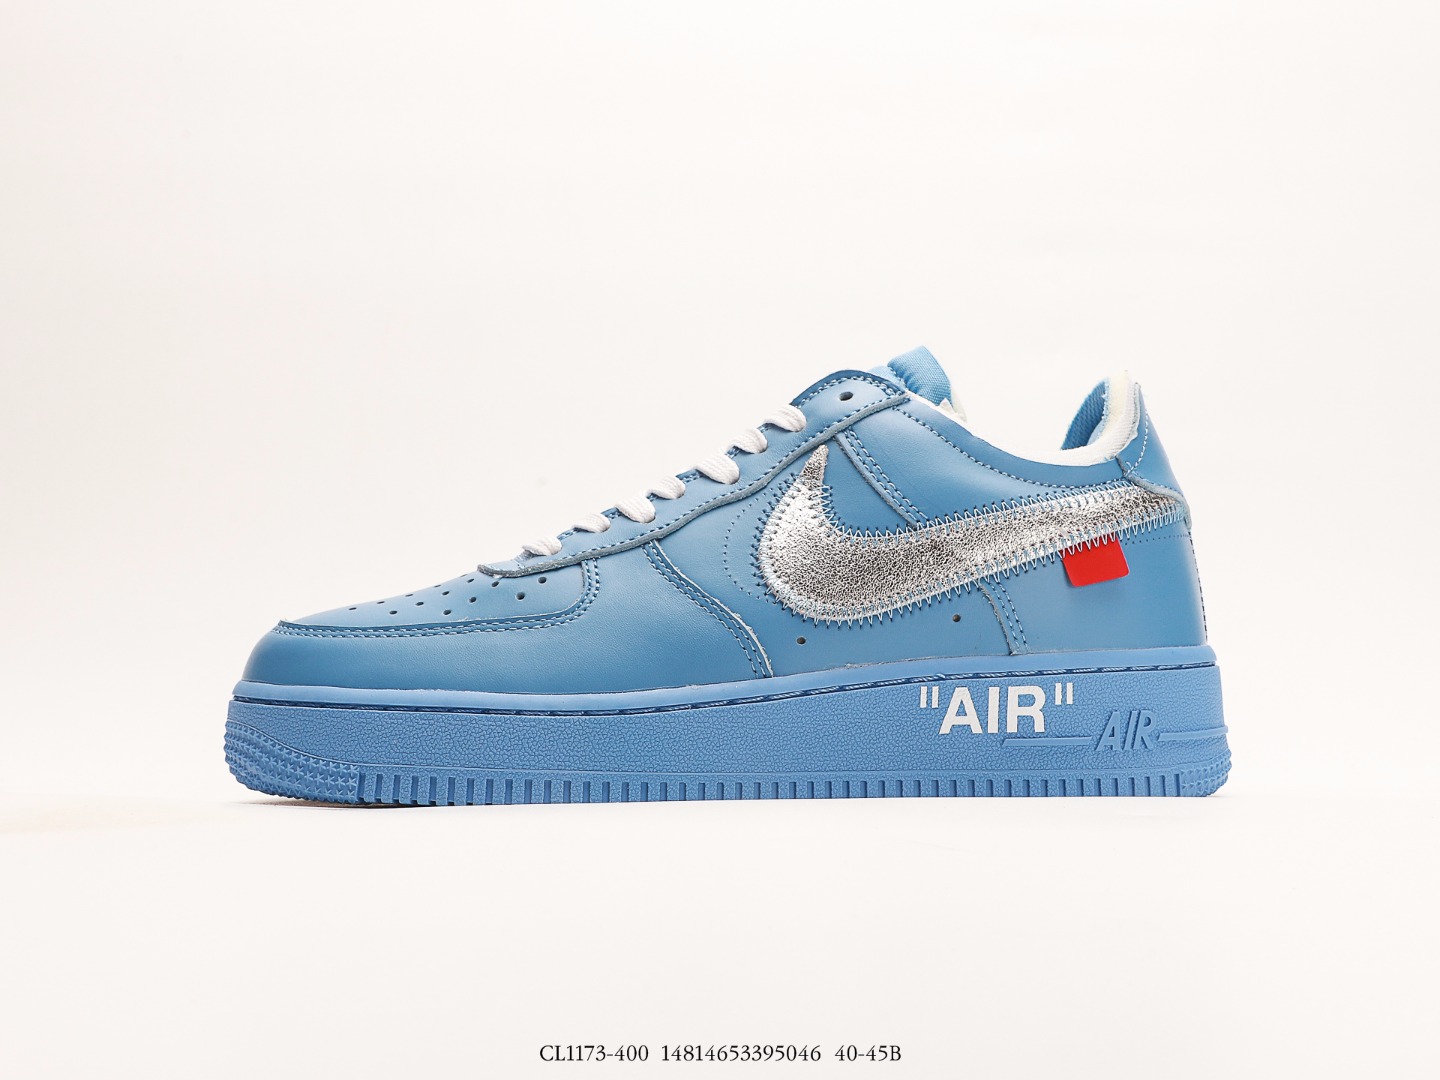 VIRGIL ABLOH(New York Brooklyn Museum) x Off-White x Nike Air Force 107 LowLight Green Spark_CL1173-400